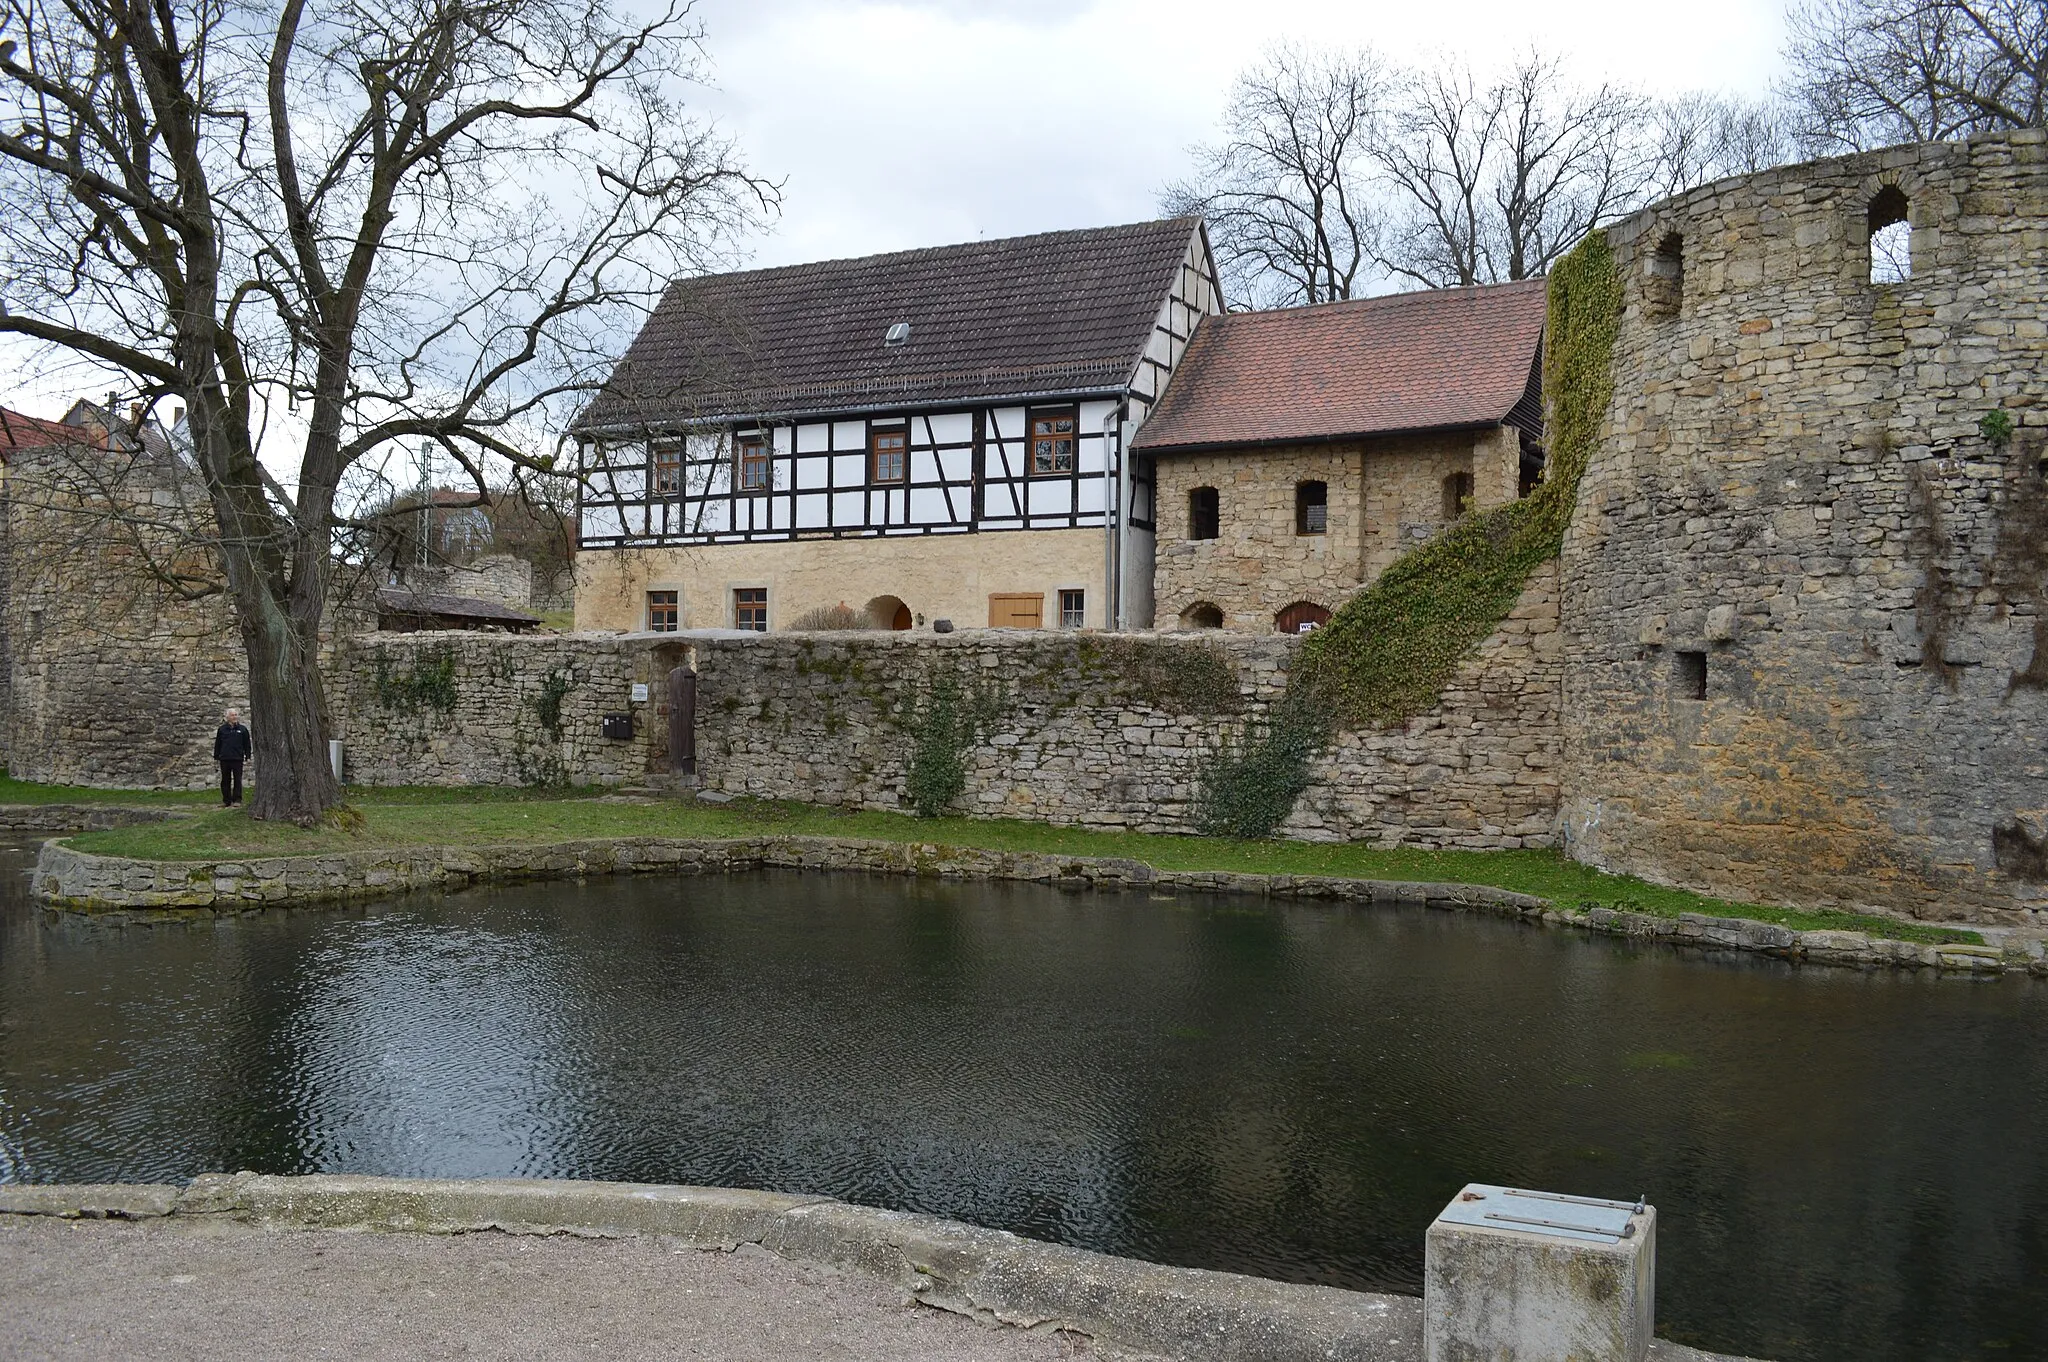 Photo showing: Schkölen, Saale-Holzland district, Thuringia, Germany, in April 2015: Water castle